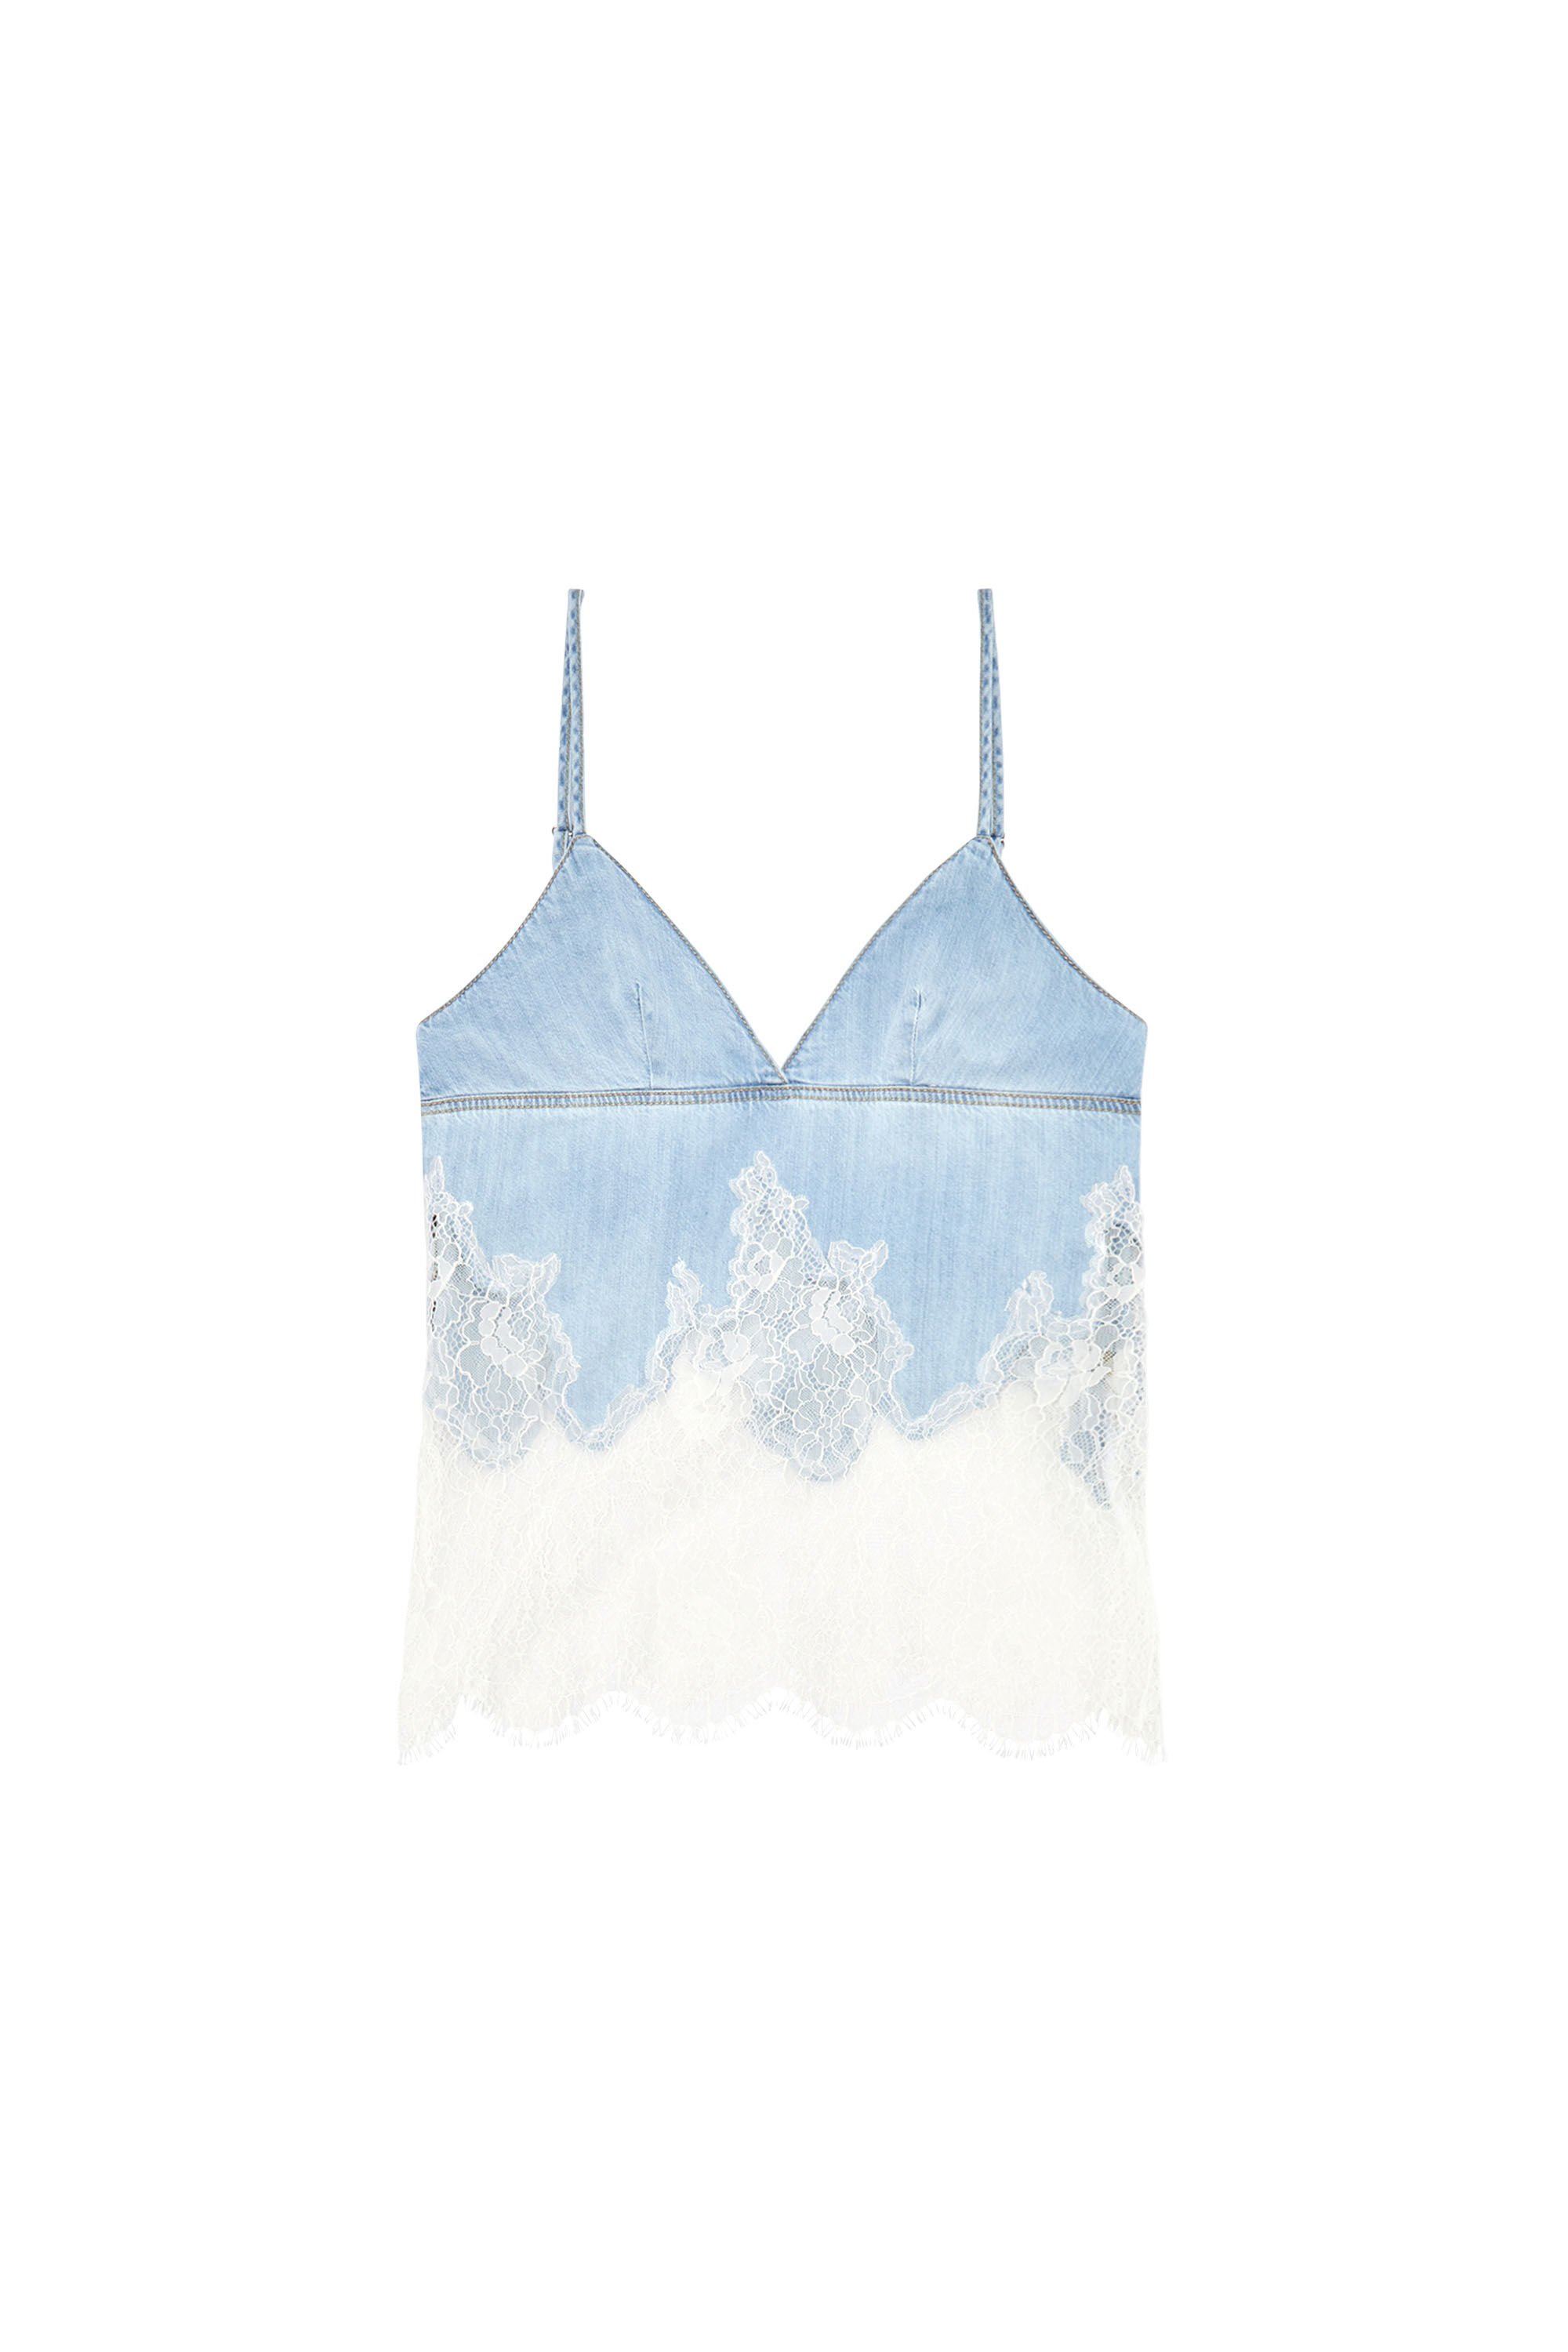 Diesel - DE-MONY-S, Woman Strappy top in denim and lace in Blue - Image 2